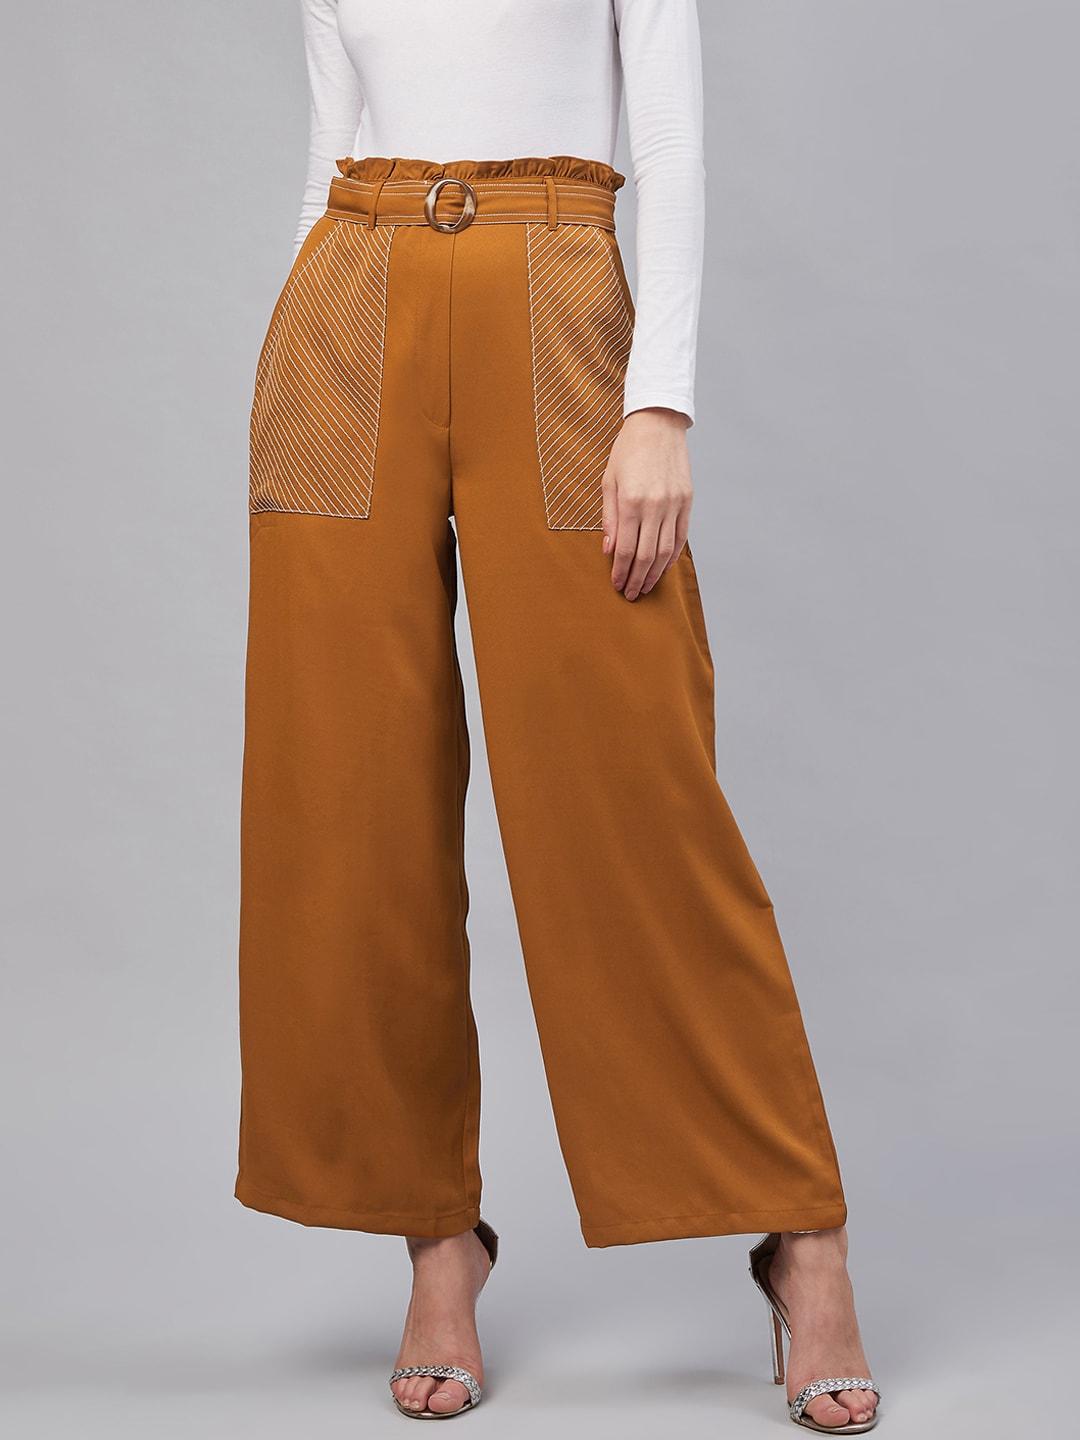 Marie Claire Women Mustard Yellow Regular Fit Solid Parallel Trousers